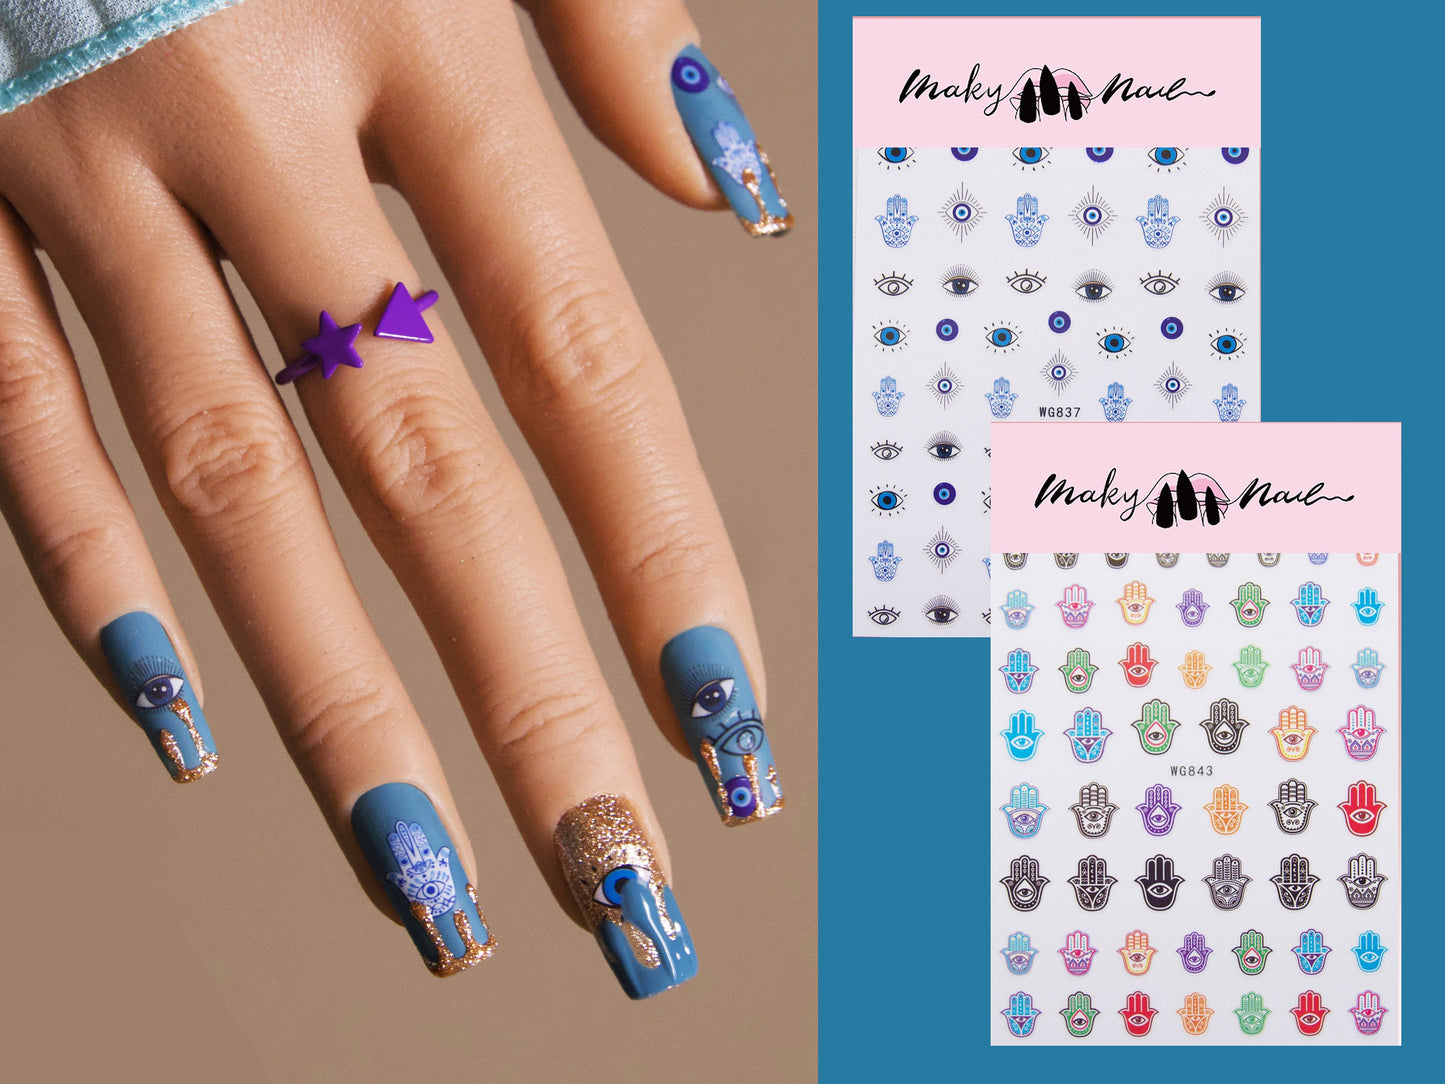 Evil eye nail sticker/ Peel off nail art stickers supply/ Blue supernatural belief The hamsa amulet nail deco easy to apply